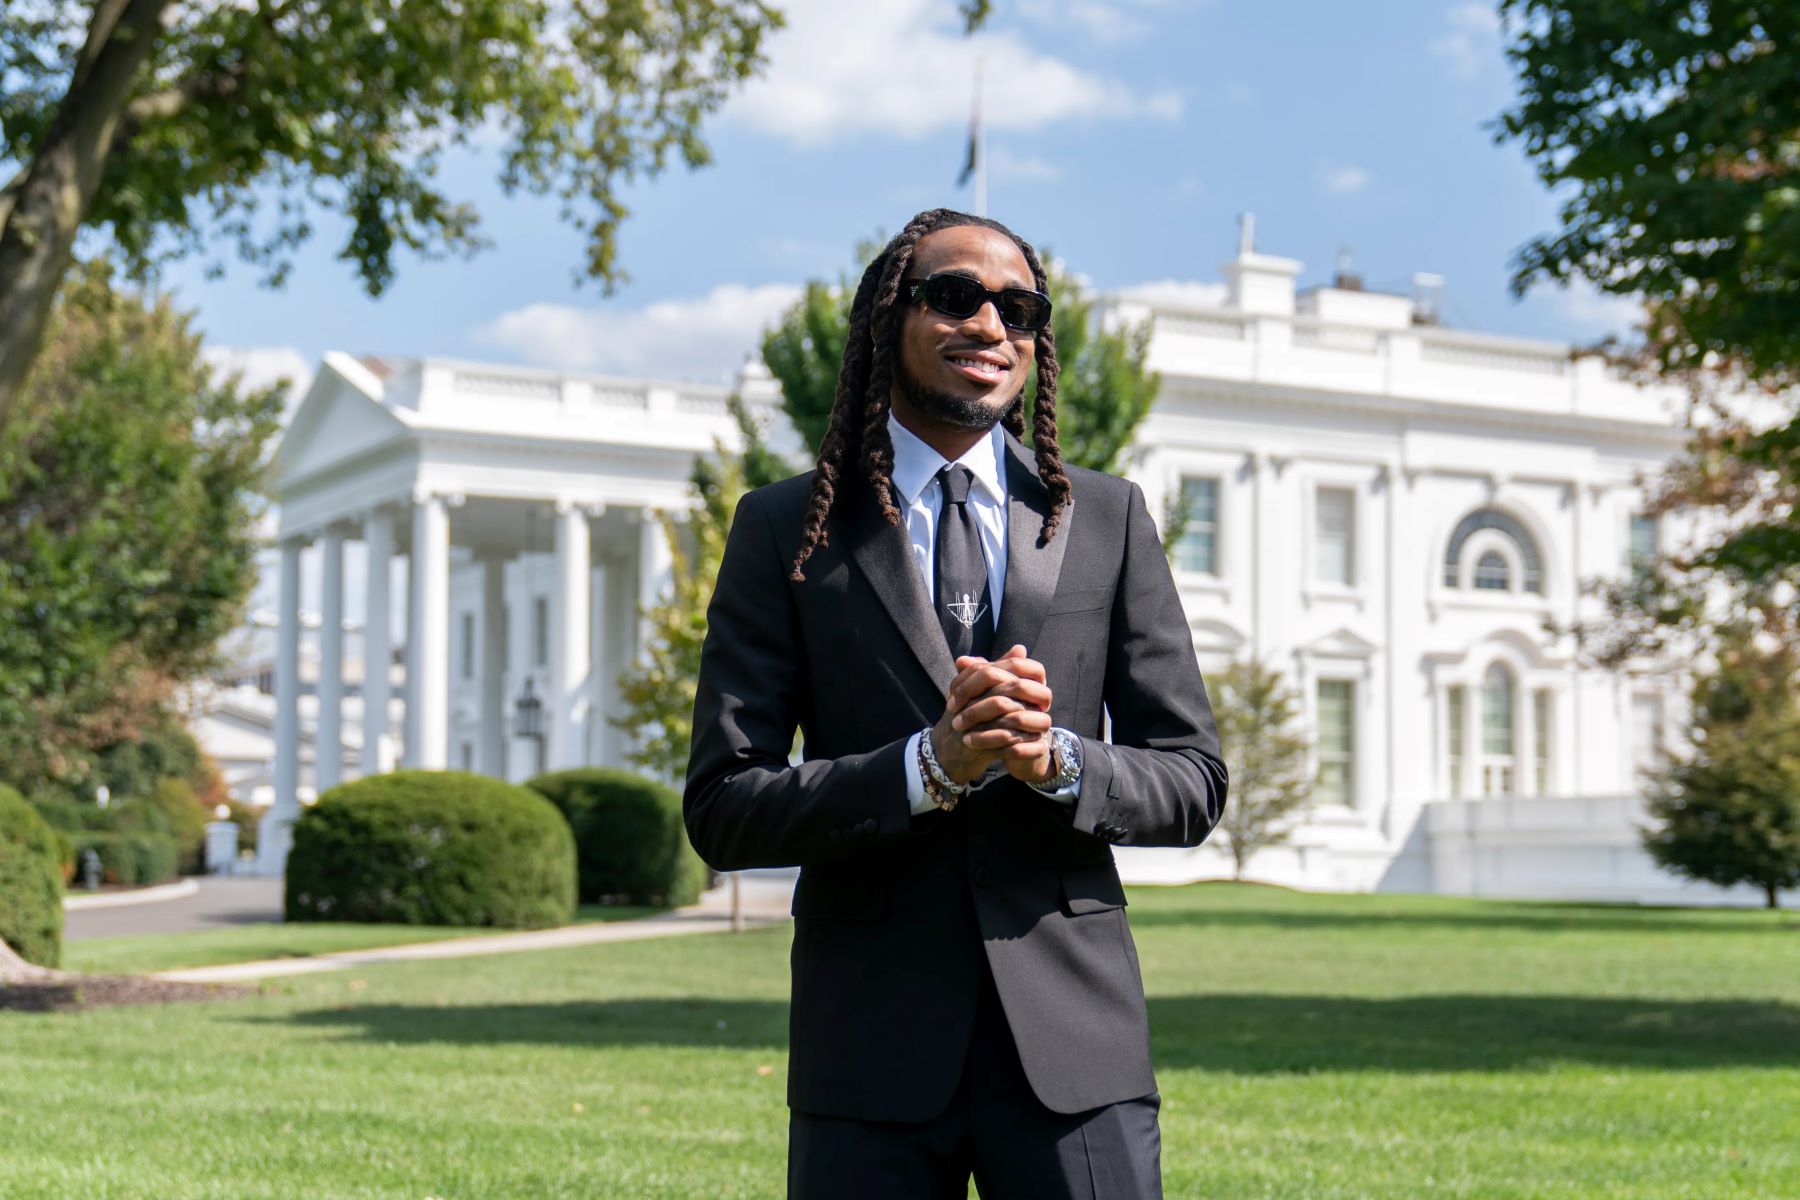 new-developments-in-gun-reform-quavo-meets-with-vp-kamala-harris-at-white-house